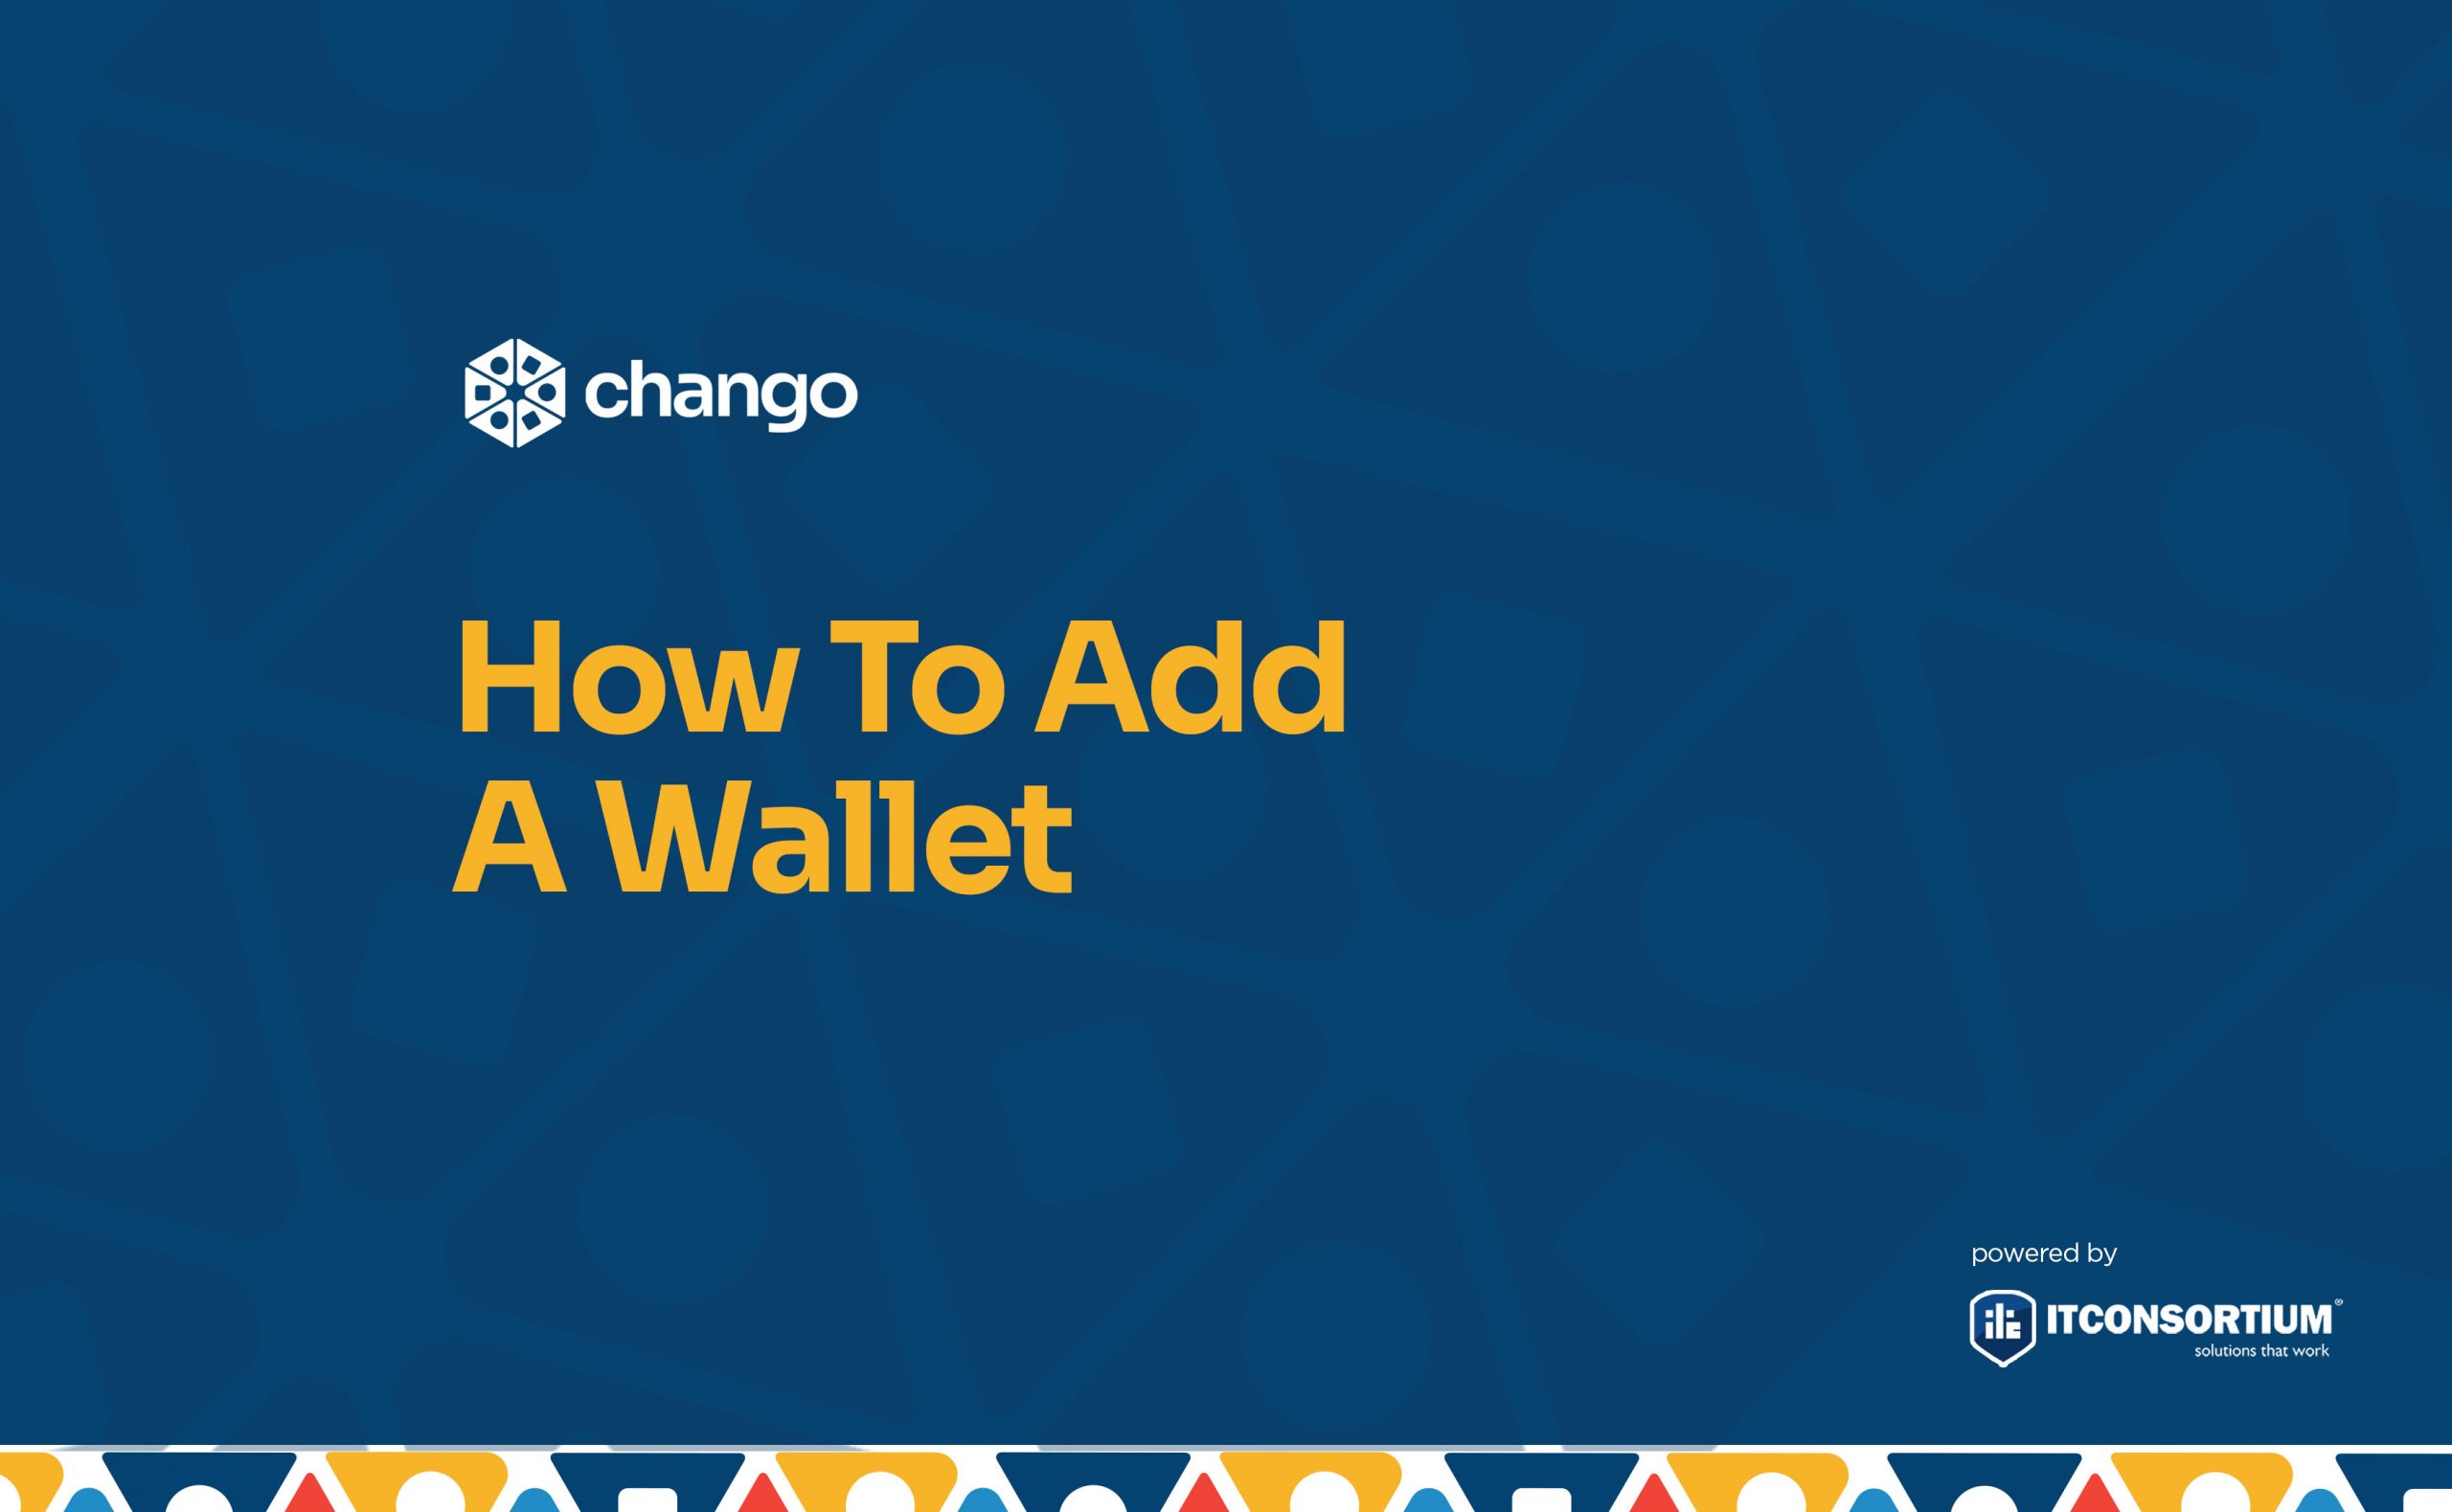 How to add a wallet